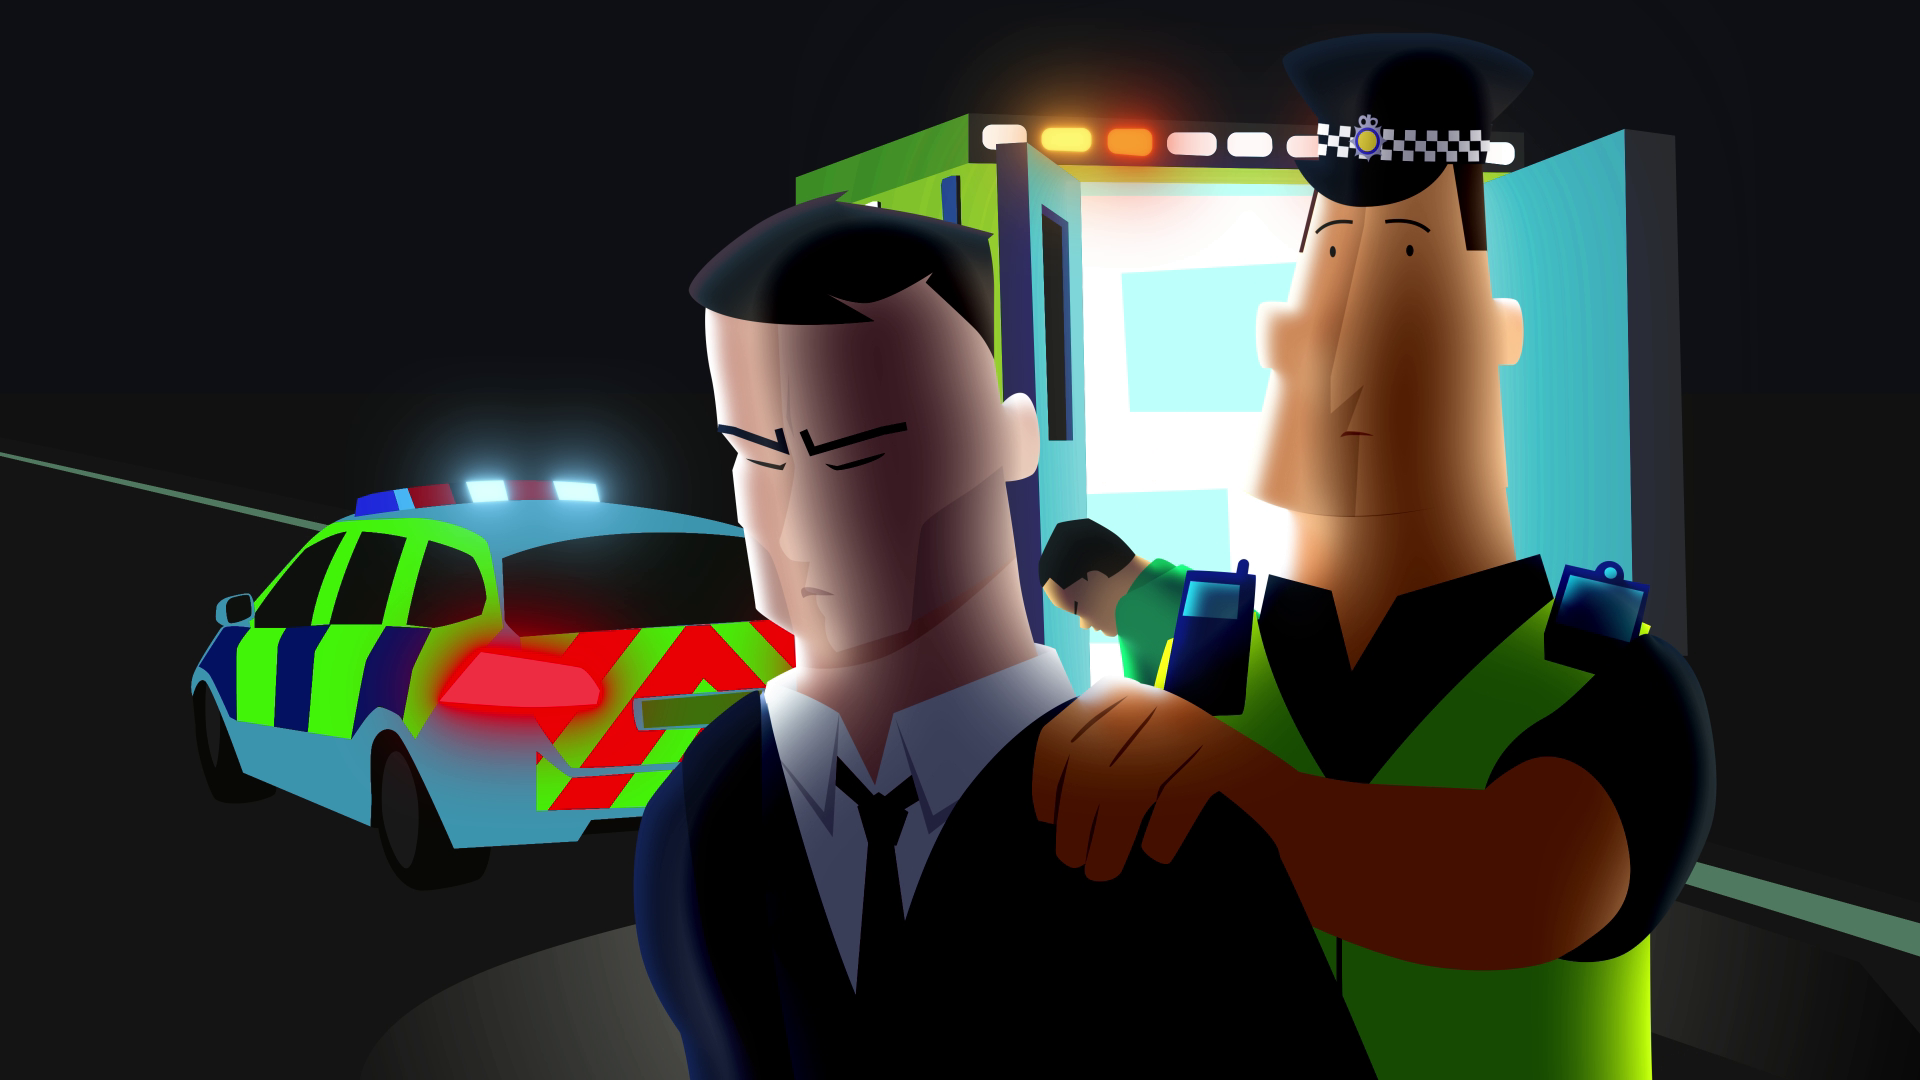 A man in a suit is escorted away by a policeman whilst in the background a paramedic kneels outside an ambulance giving cpr.